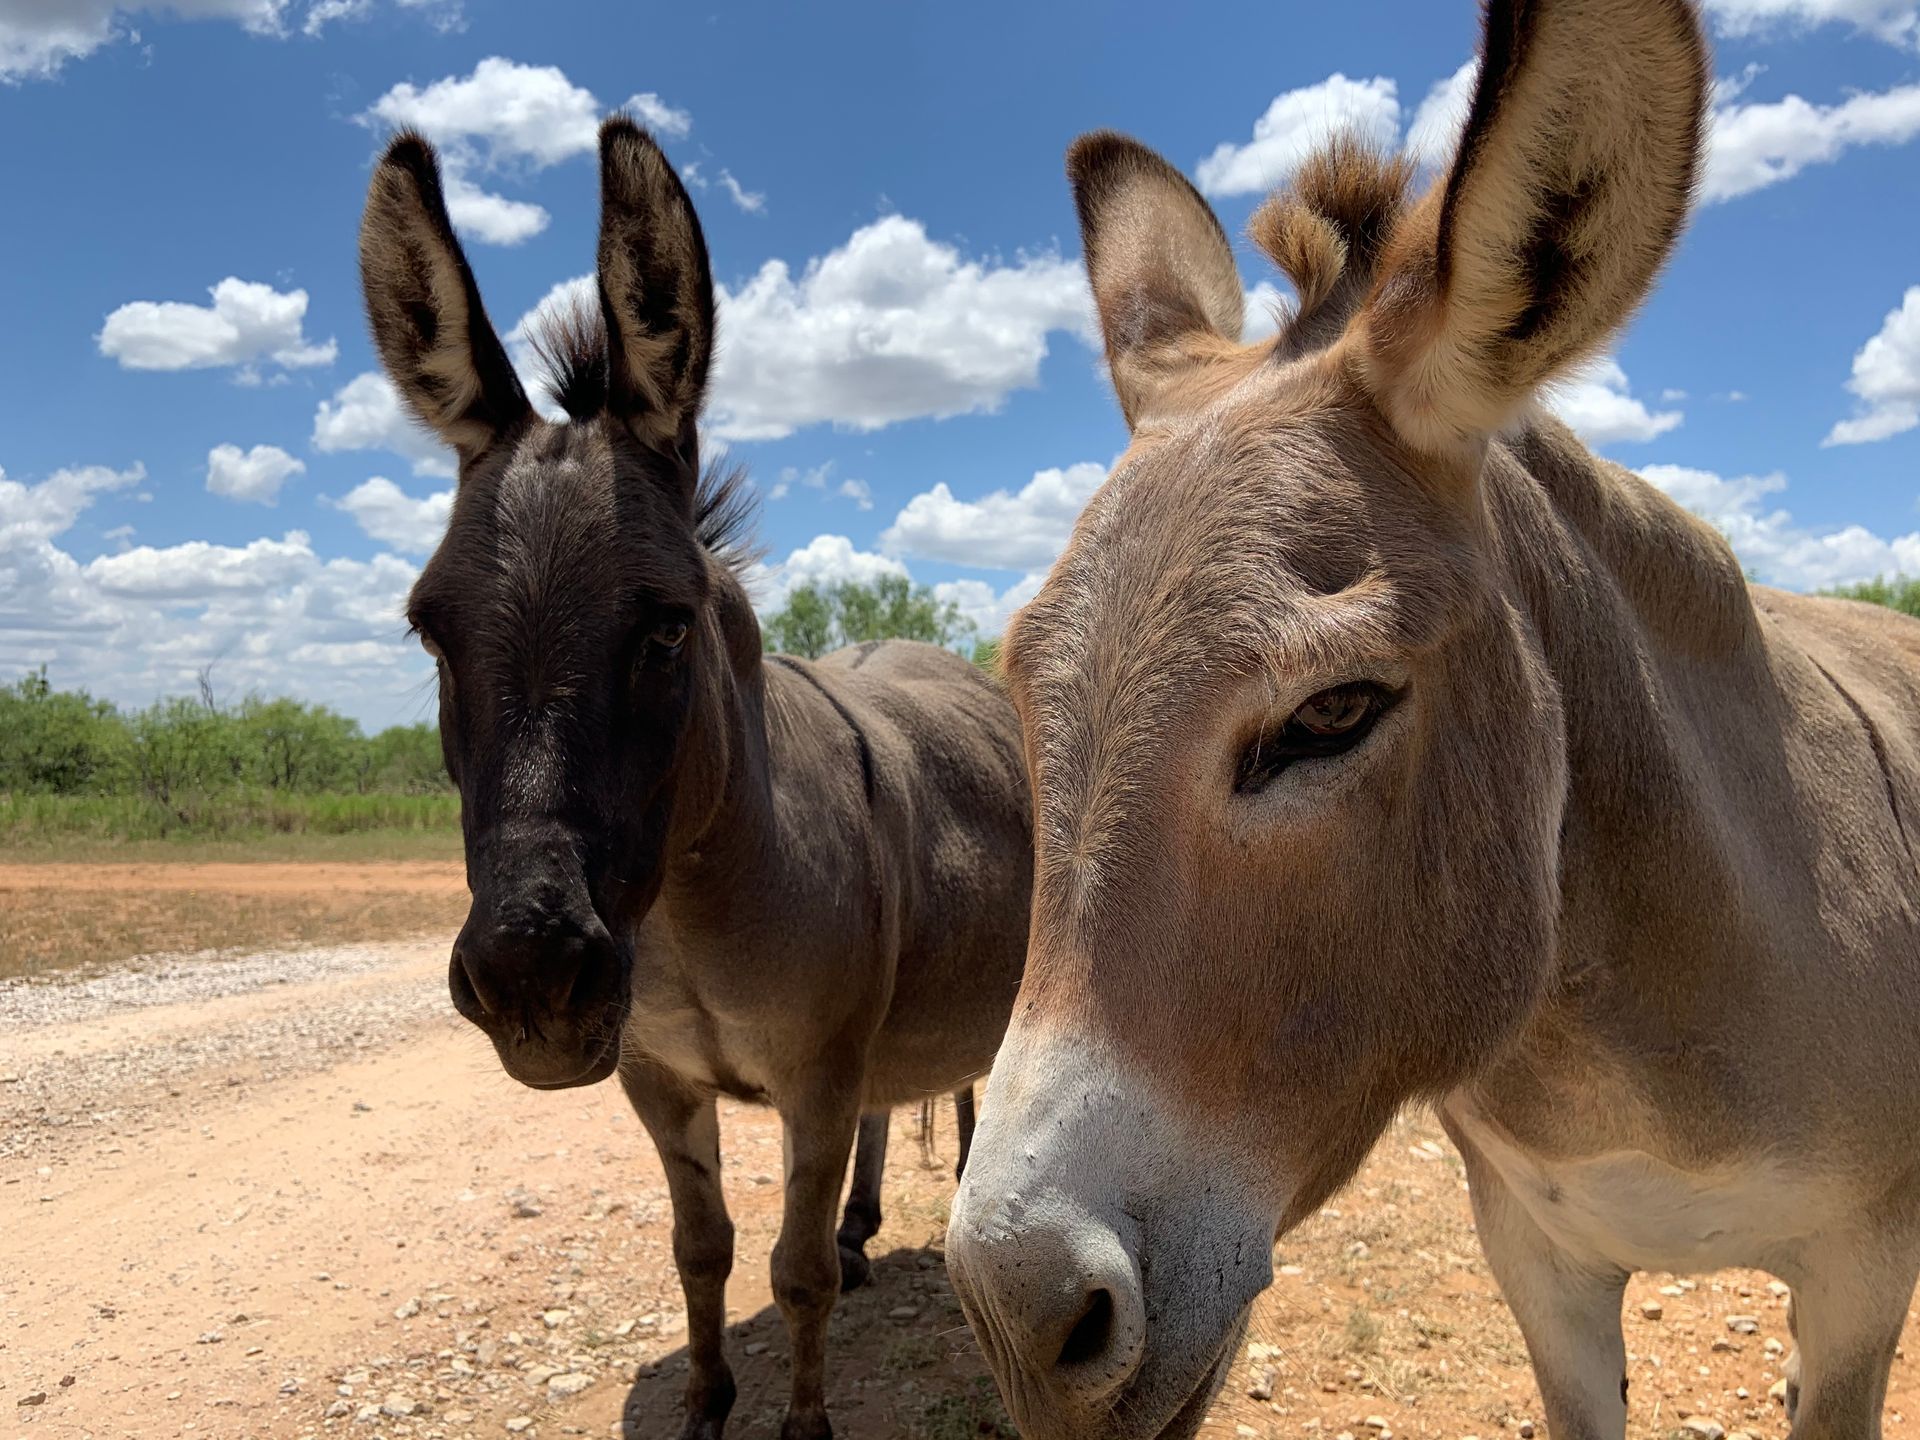 Two donkeys are standing next to each other on a dirt road.